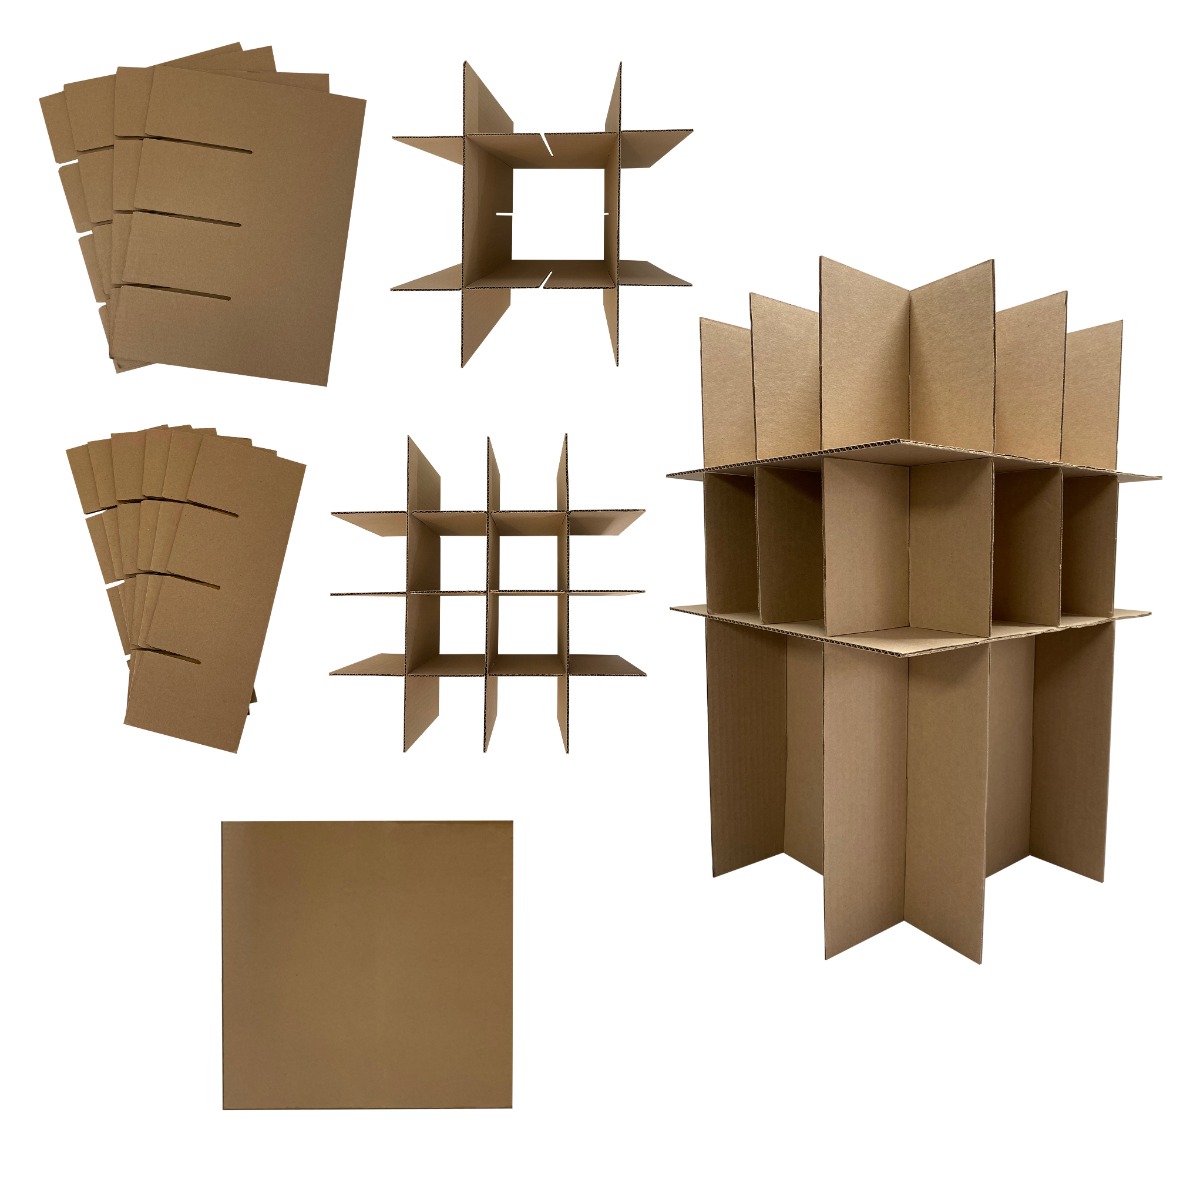 UBMOVE Dish &amp; Glass Partition Insert Kit 4 pack fits in our kitchen boxes